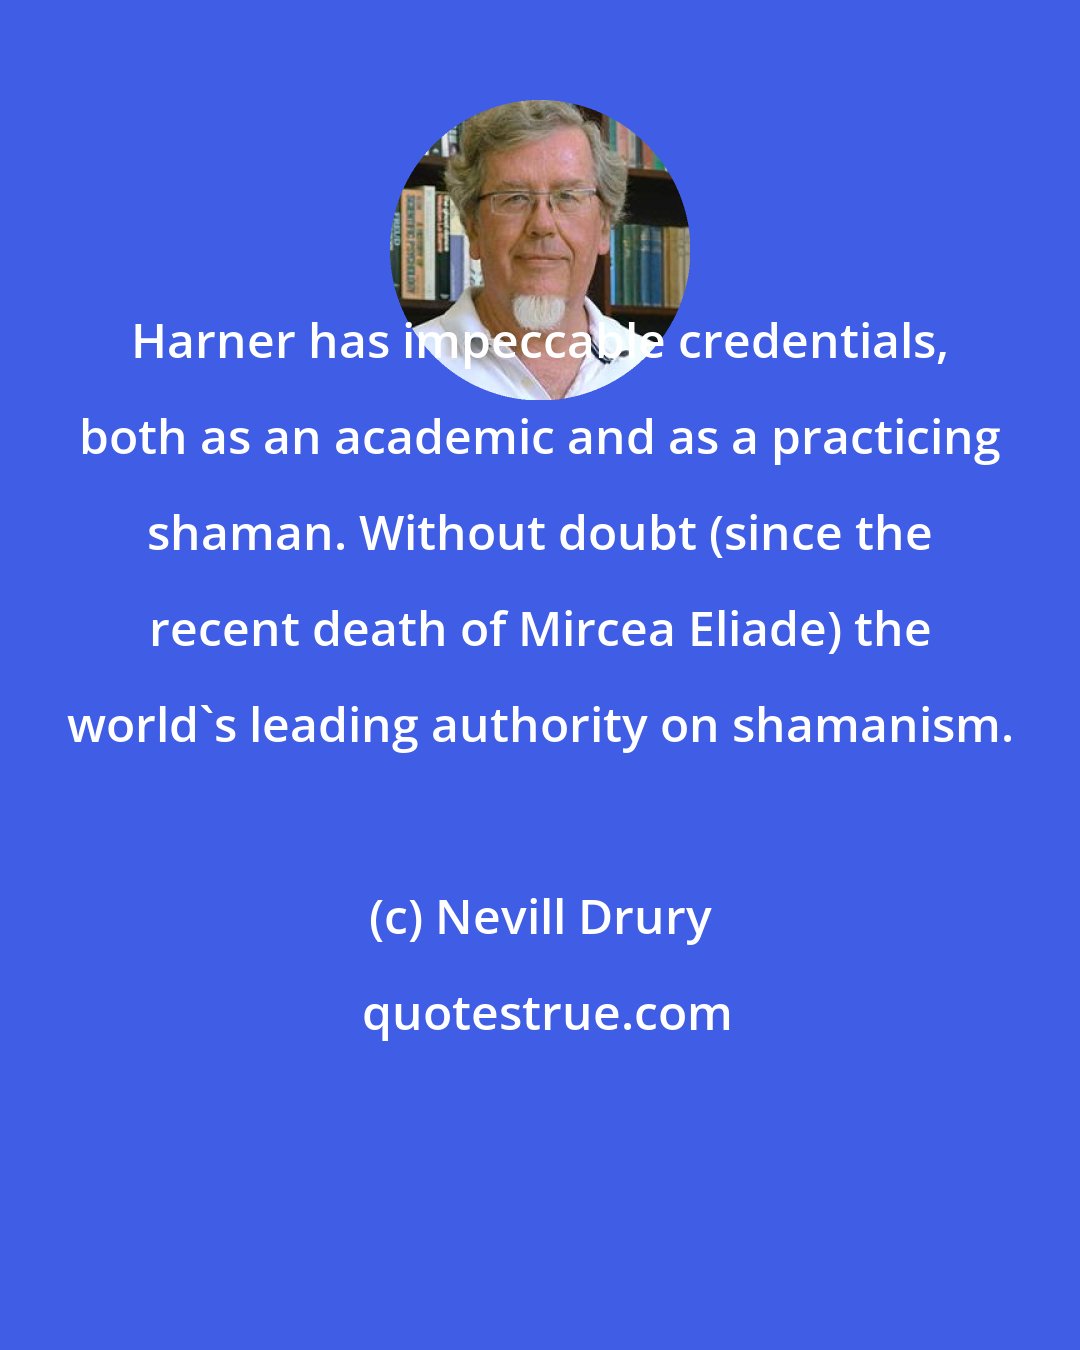 Nevill Drury: Harner has impeccable credentials, both as an academic and as a practicing shaman. Without doubt (since the recent death of Mircea Eliade) the world's leading authority on shamanism.